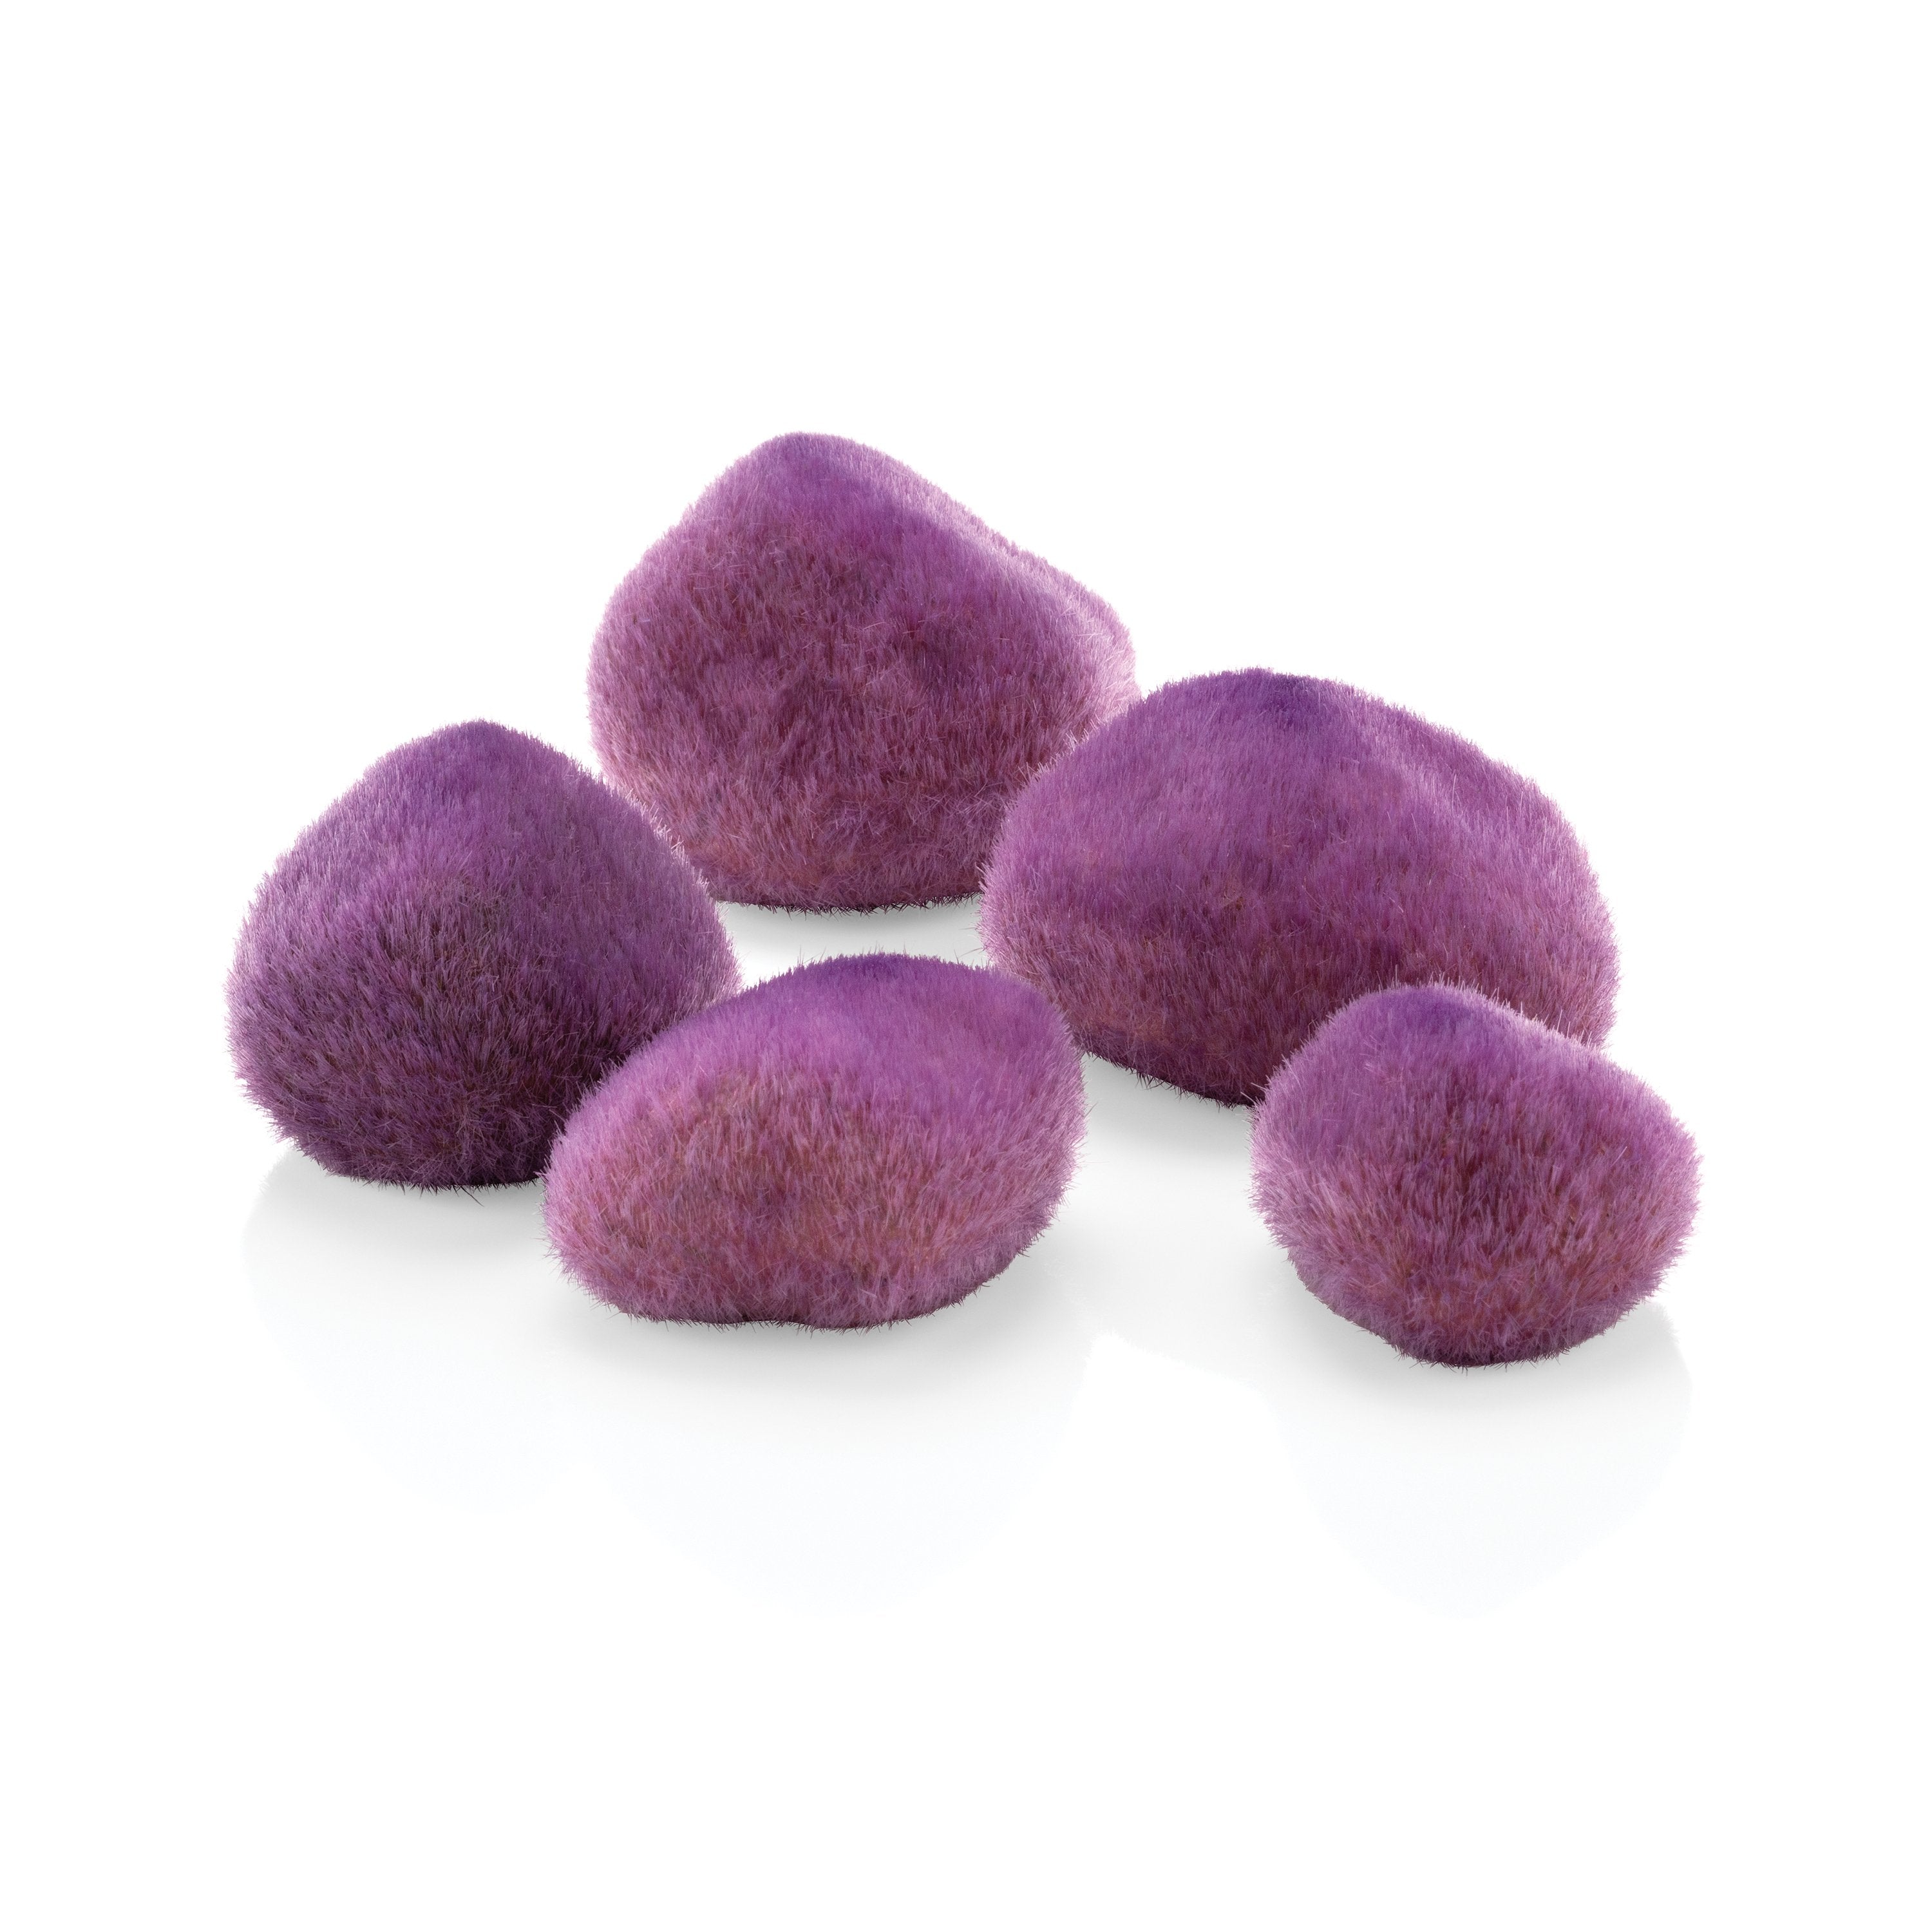 Moss Pebbles Set available in Purple